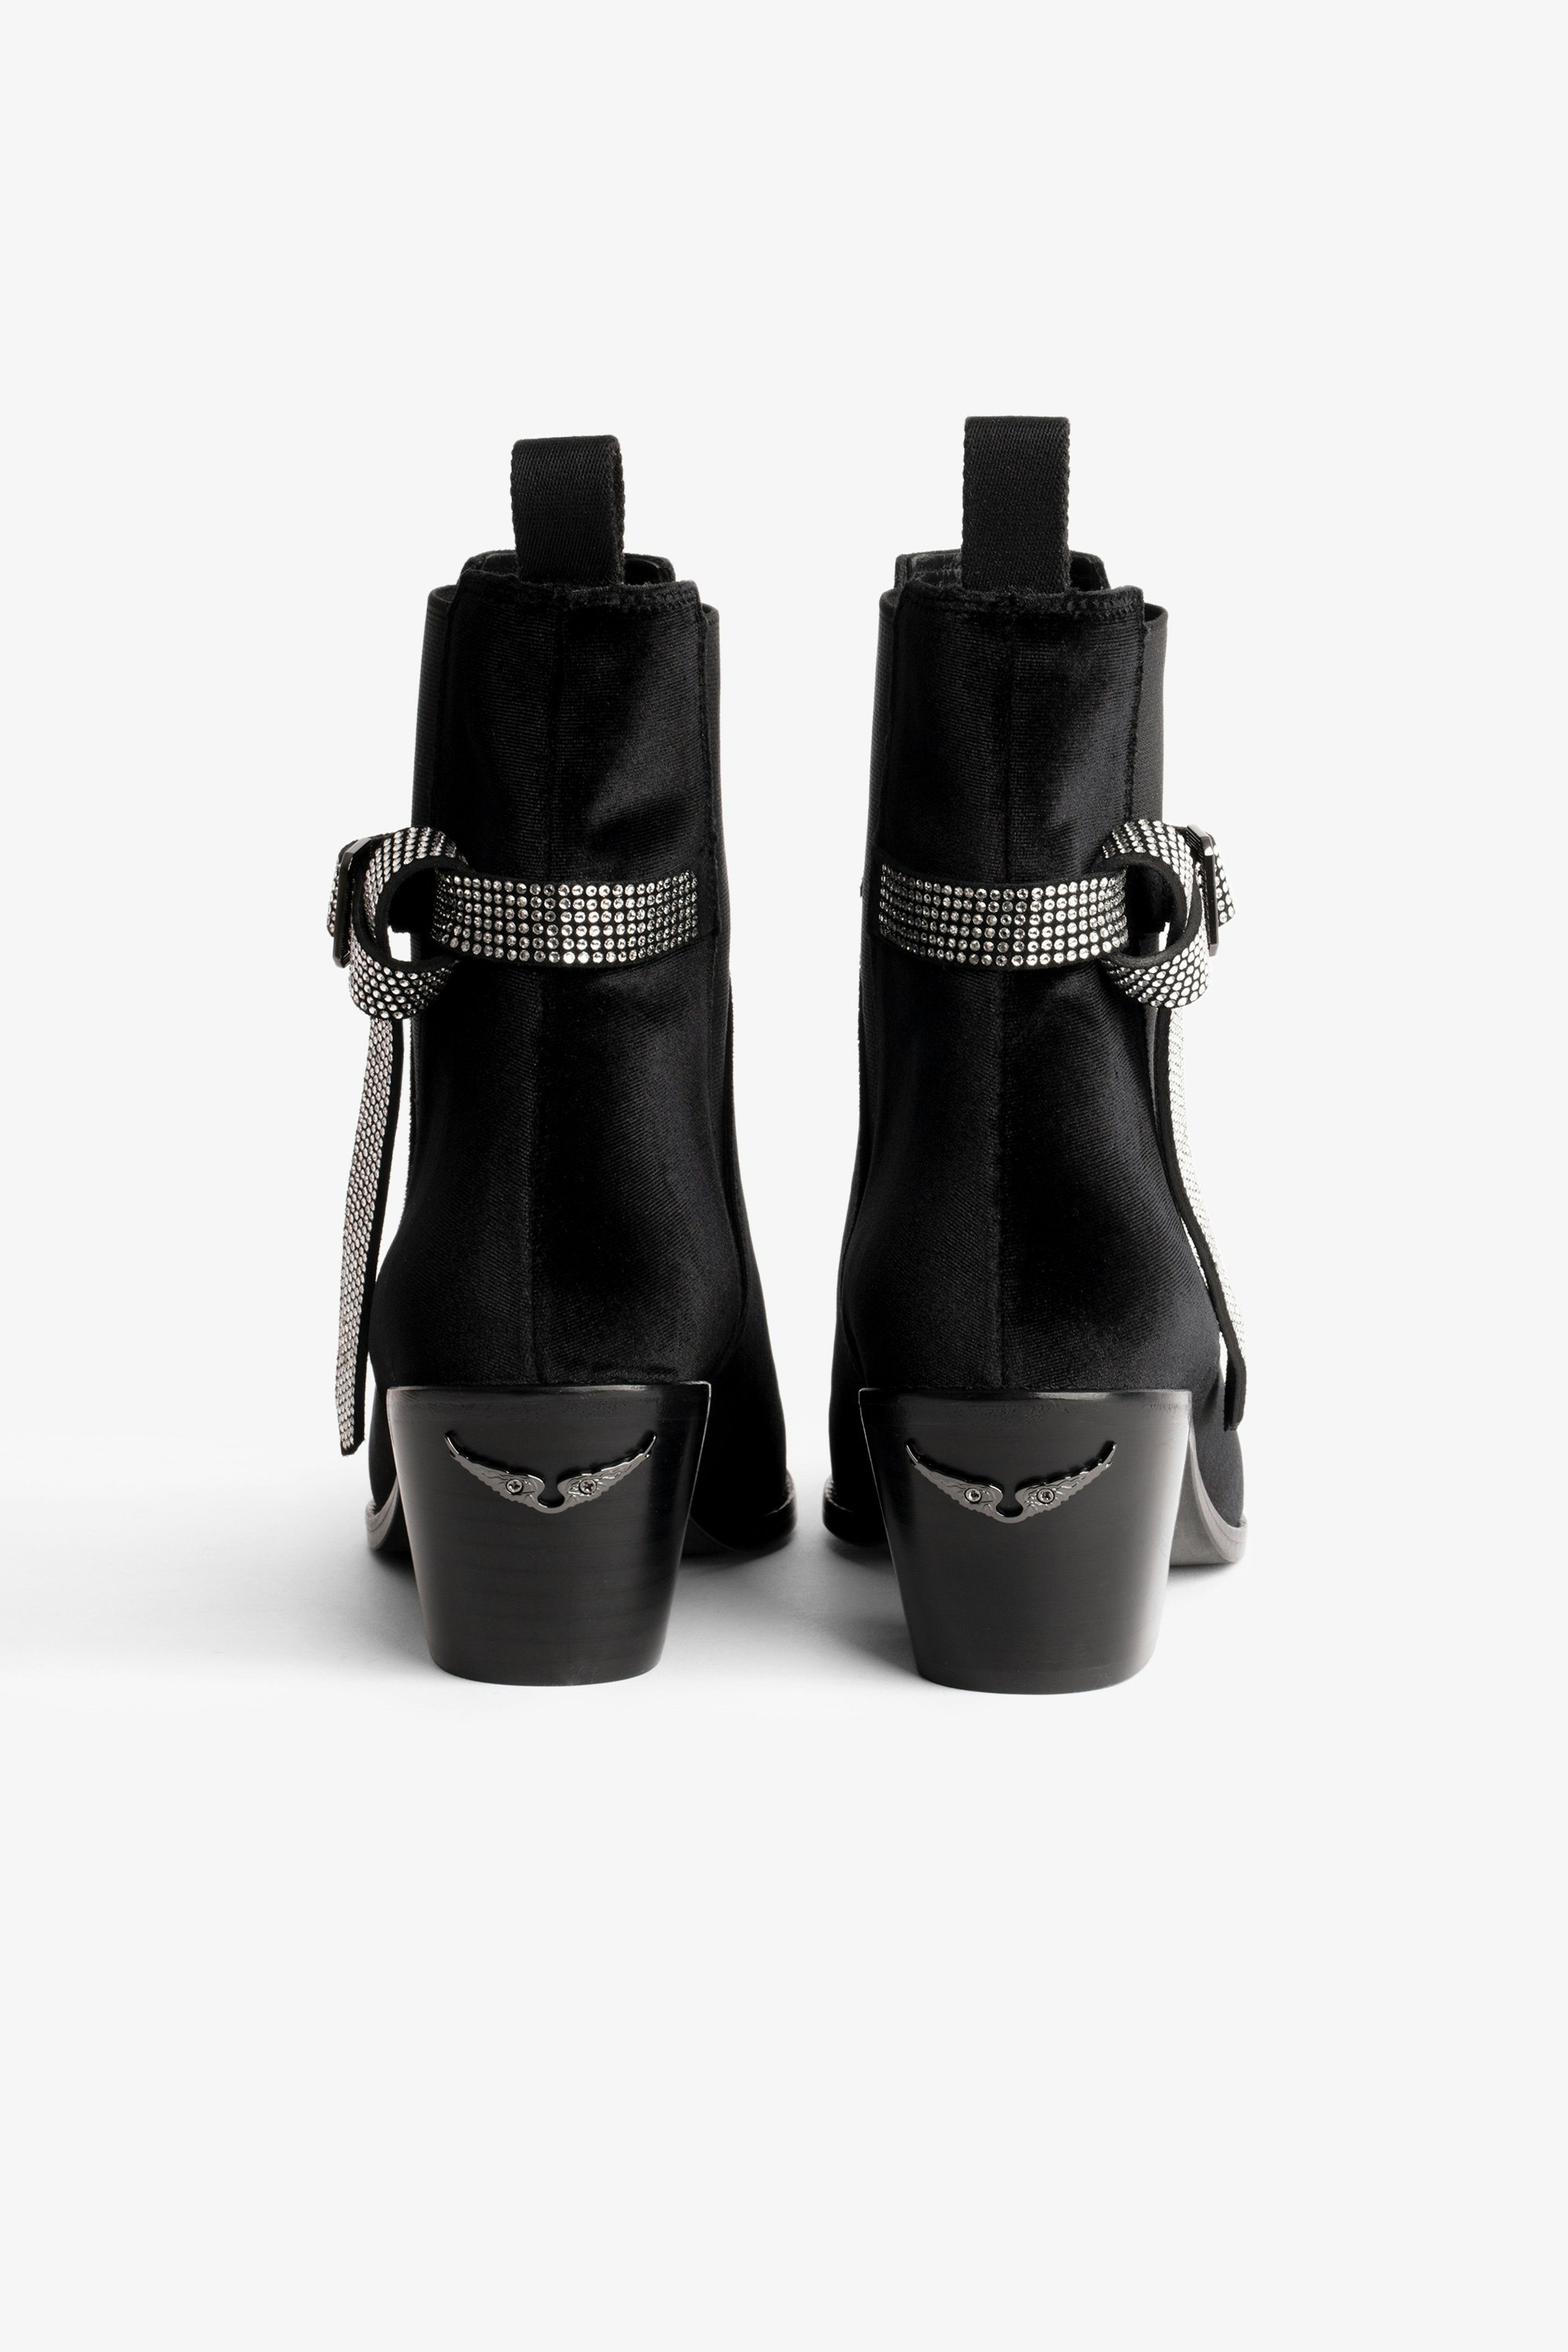 Tyler Cecilia Ankle Boots